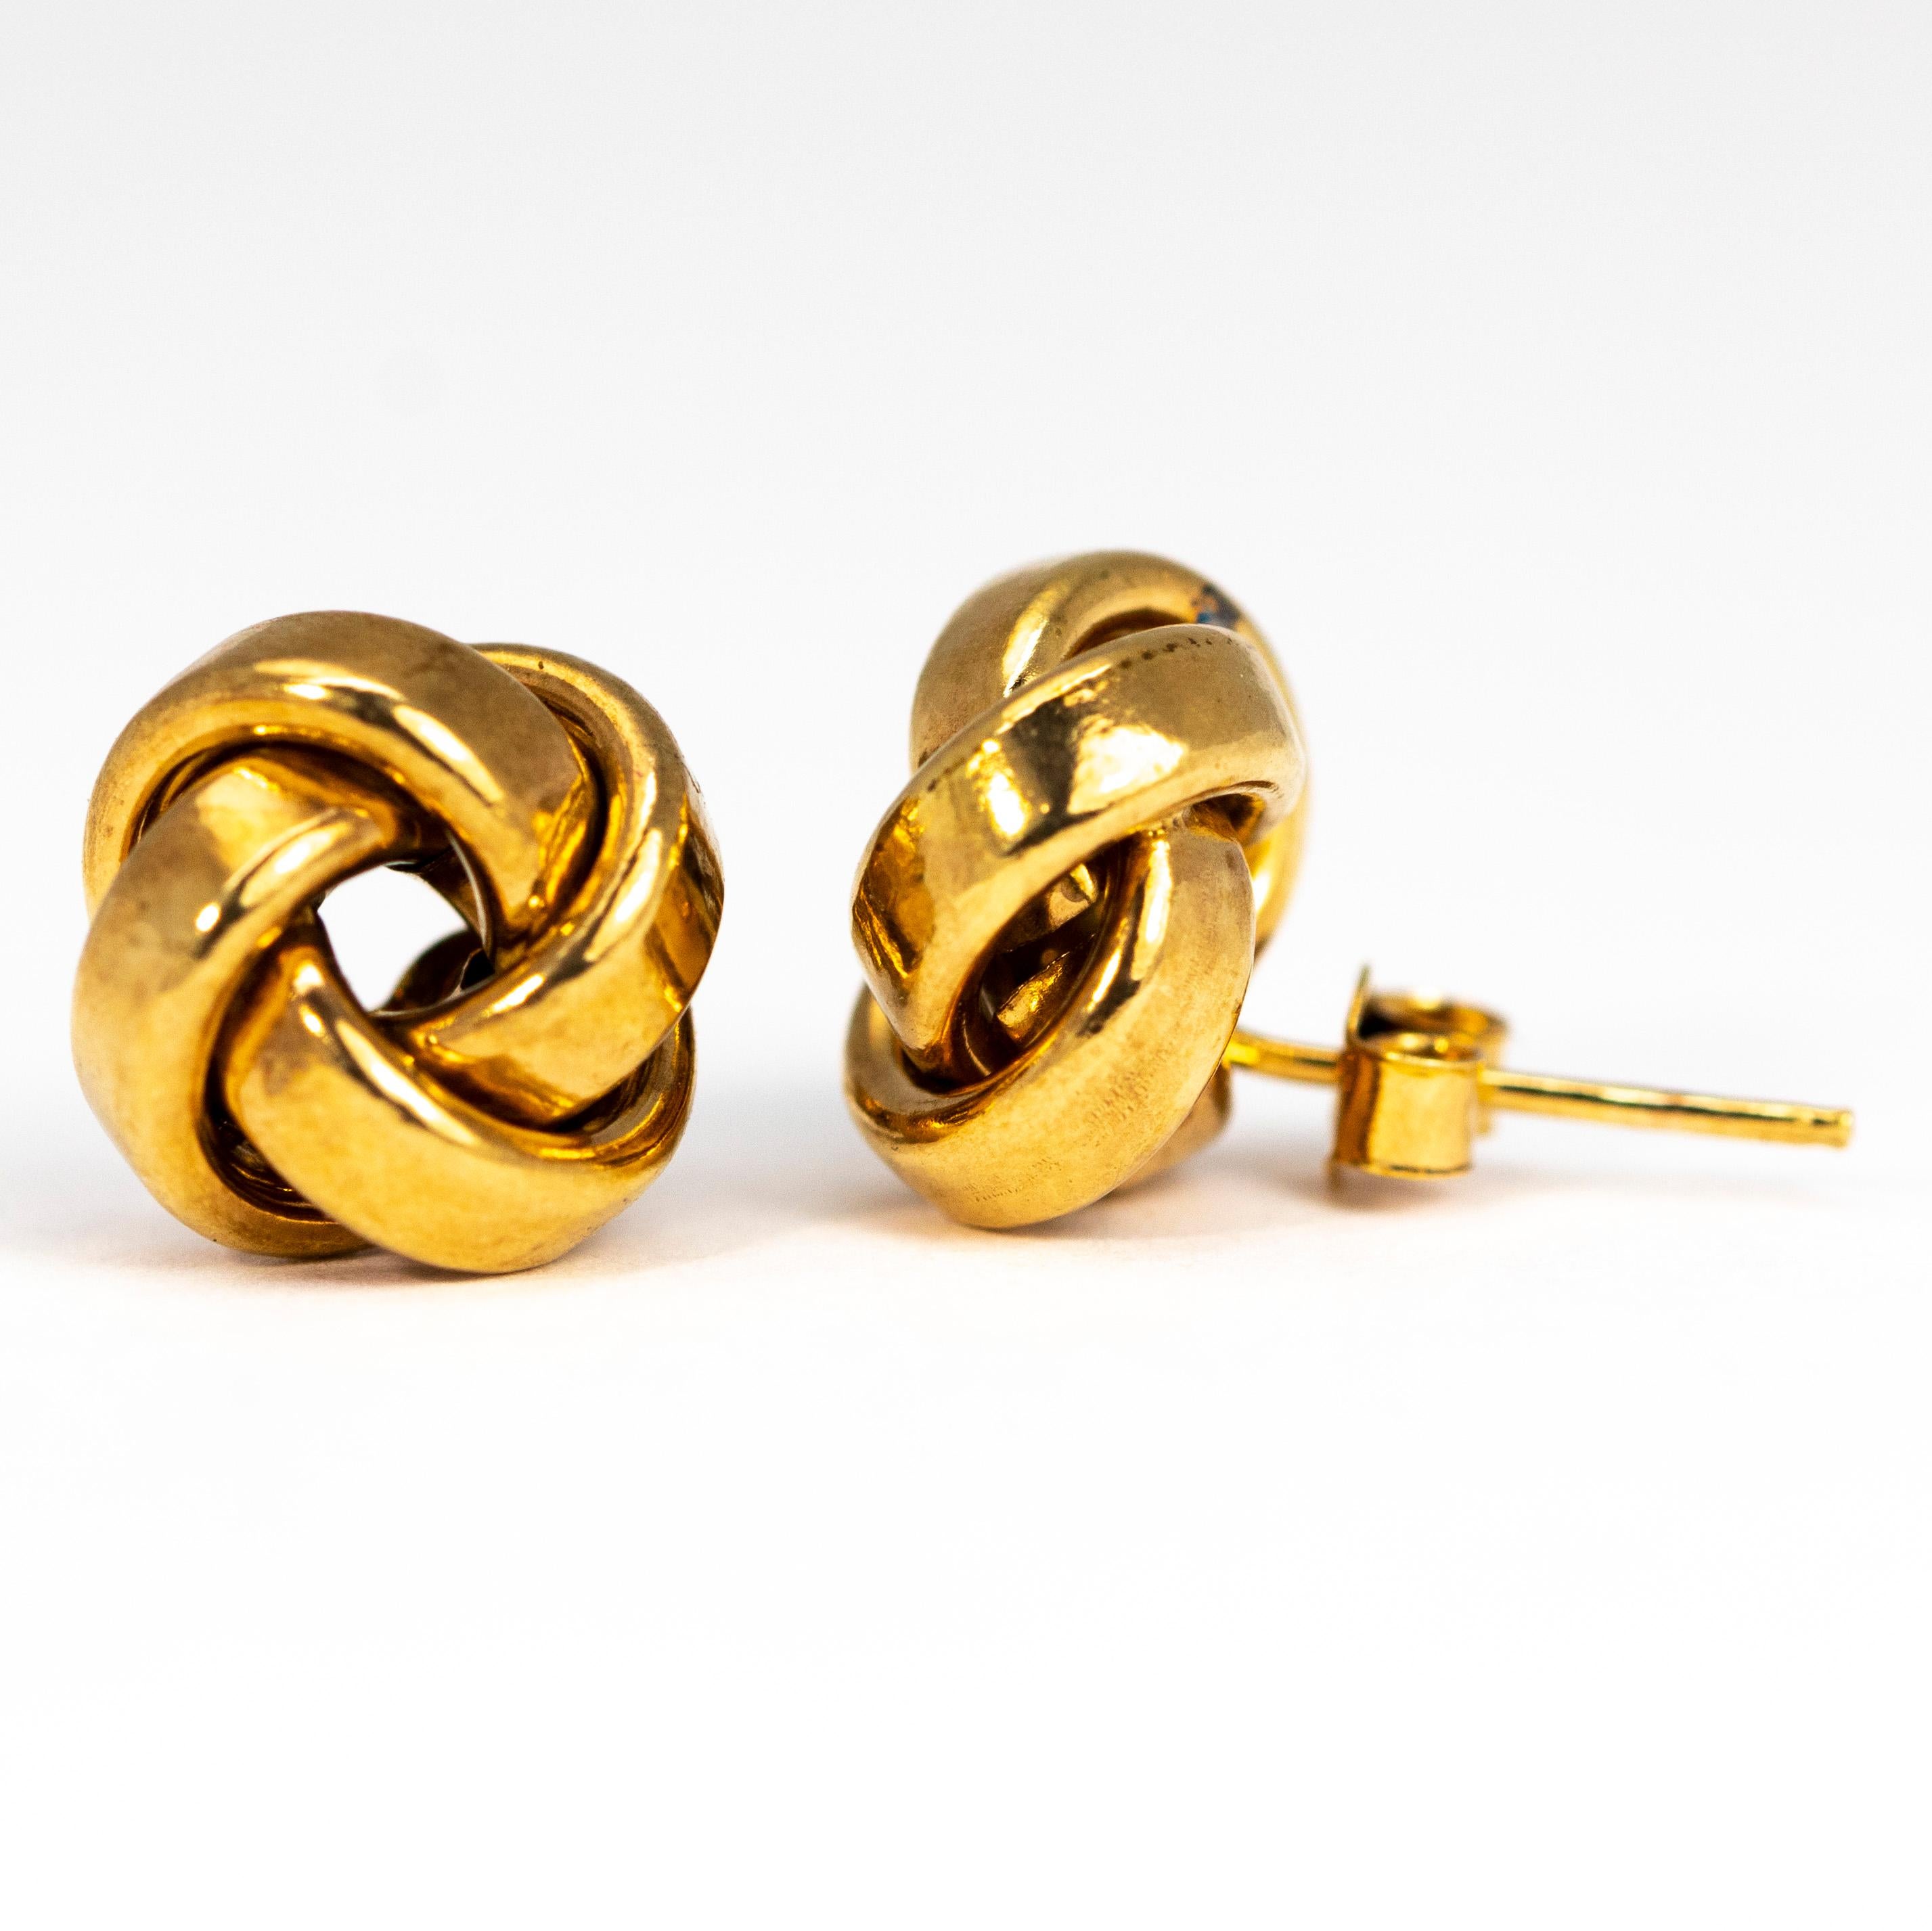 Glossy 9ct yellow gold superbly tied in a knot make the most stylish design for these earrings.

Knot Diameter: 10.5mm

Weight: 1g